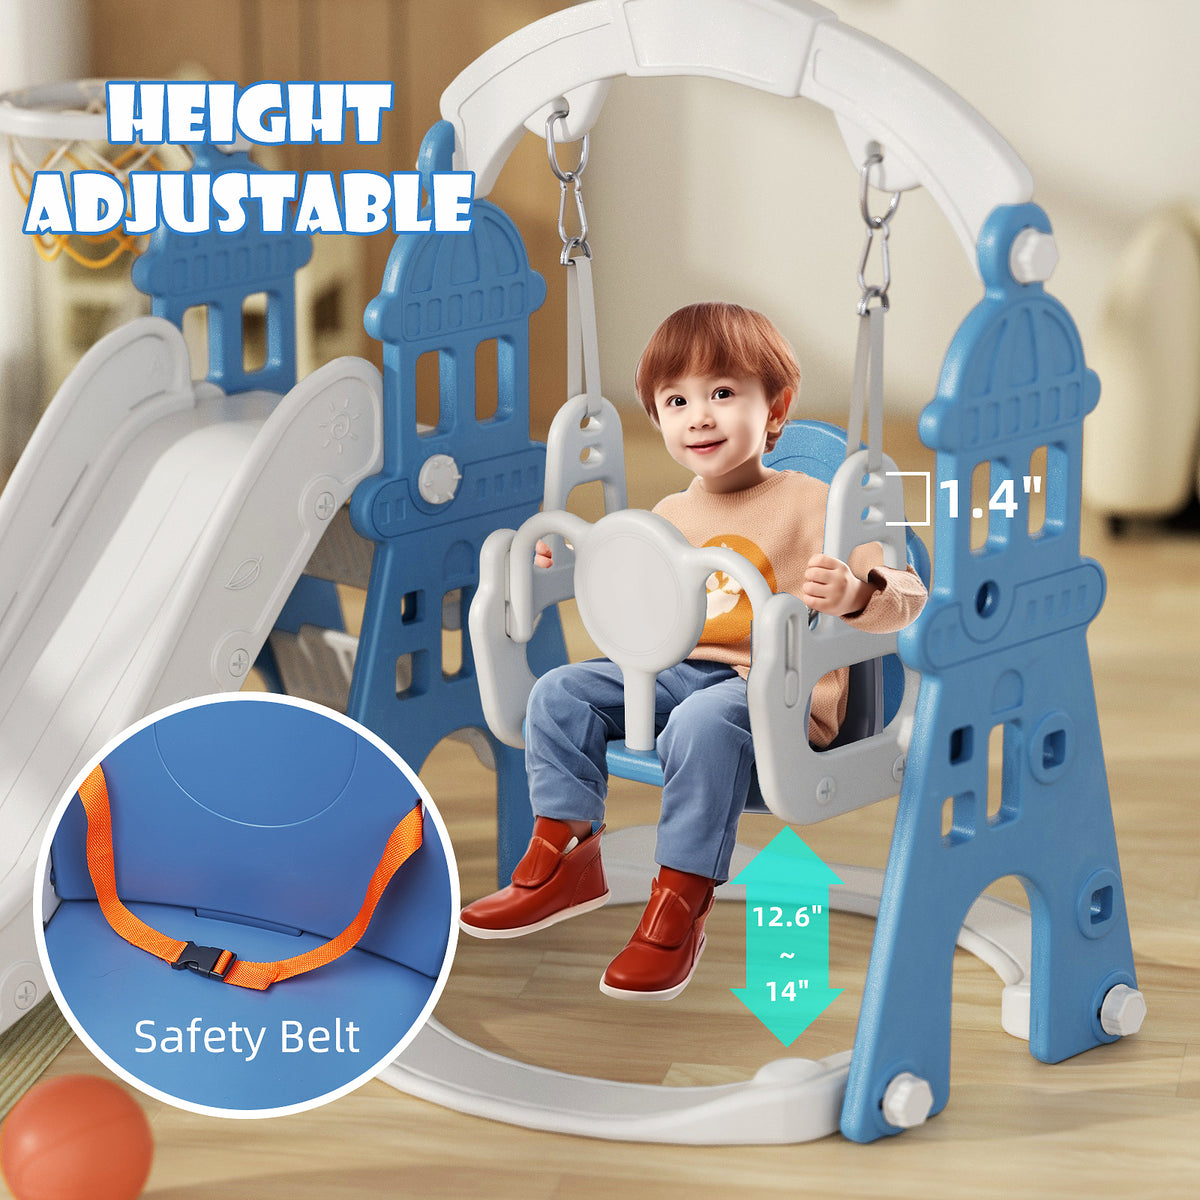 XJD 5-in-1 Toddler Slide and Swing Set Blue In Stock USA